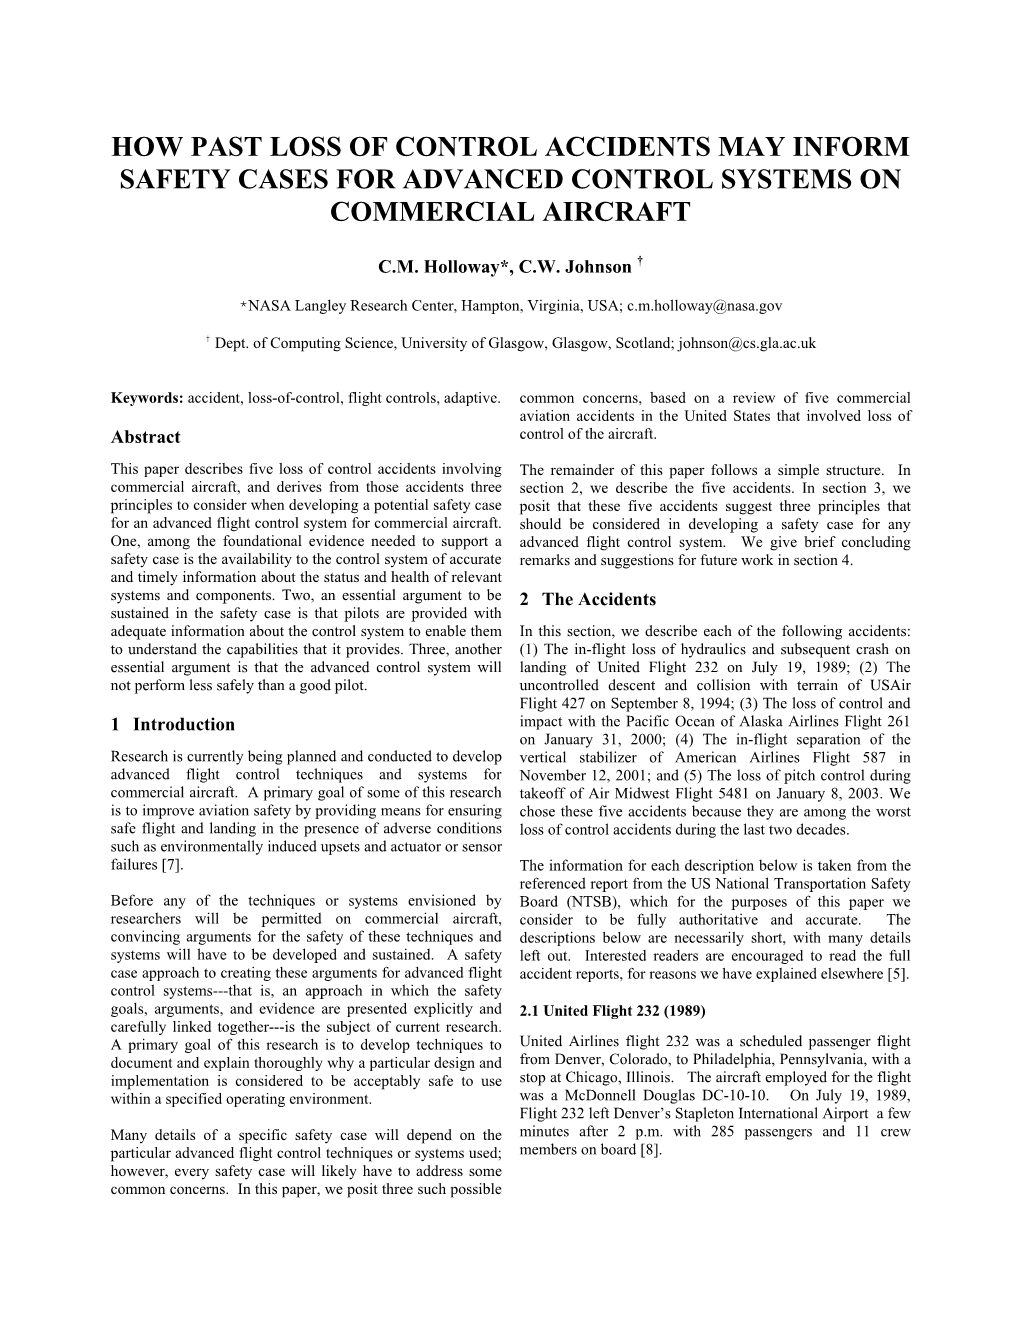 How Past Loss of Control Accidents May Inform Safety Cases for Advanced Control Systems on Commercial Aircraft